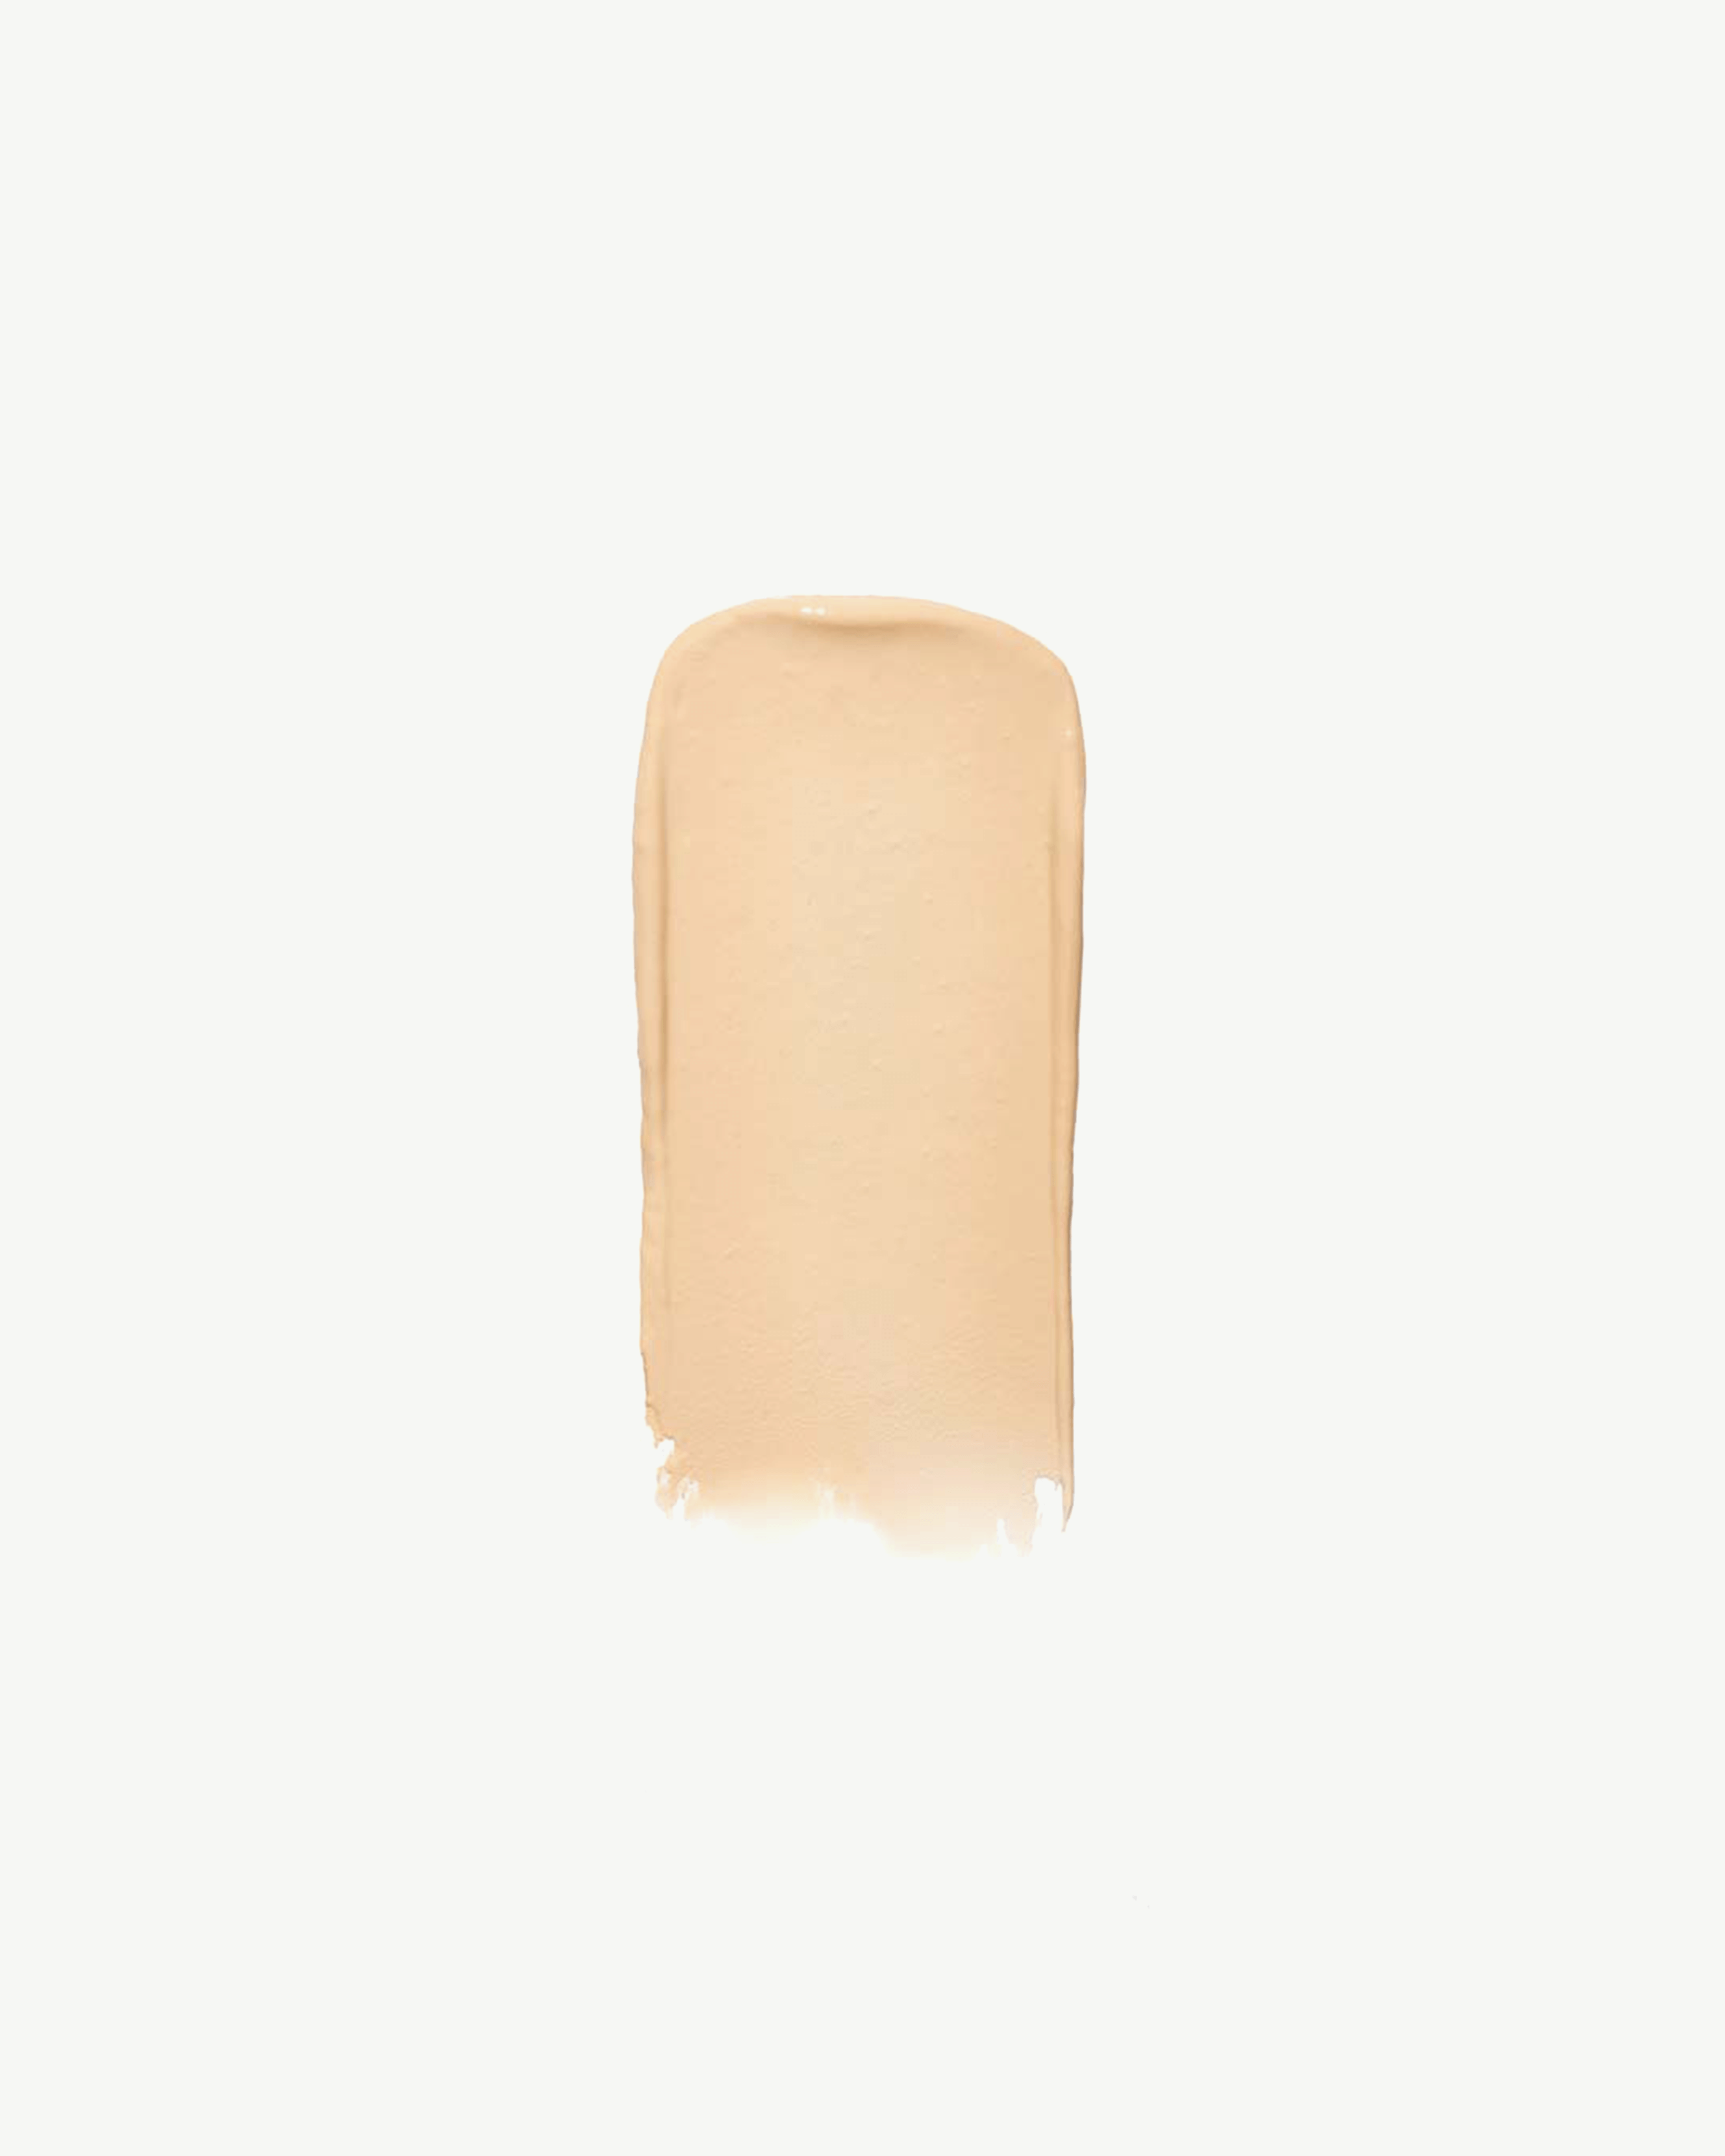 UnCover Up Concealer